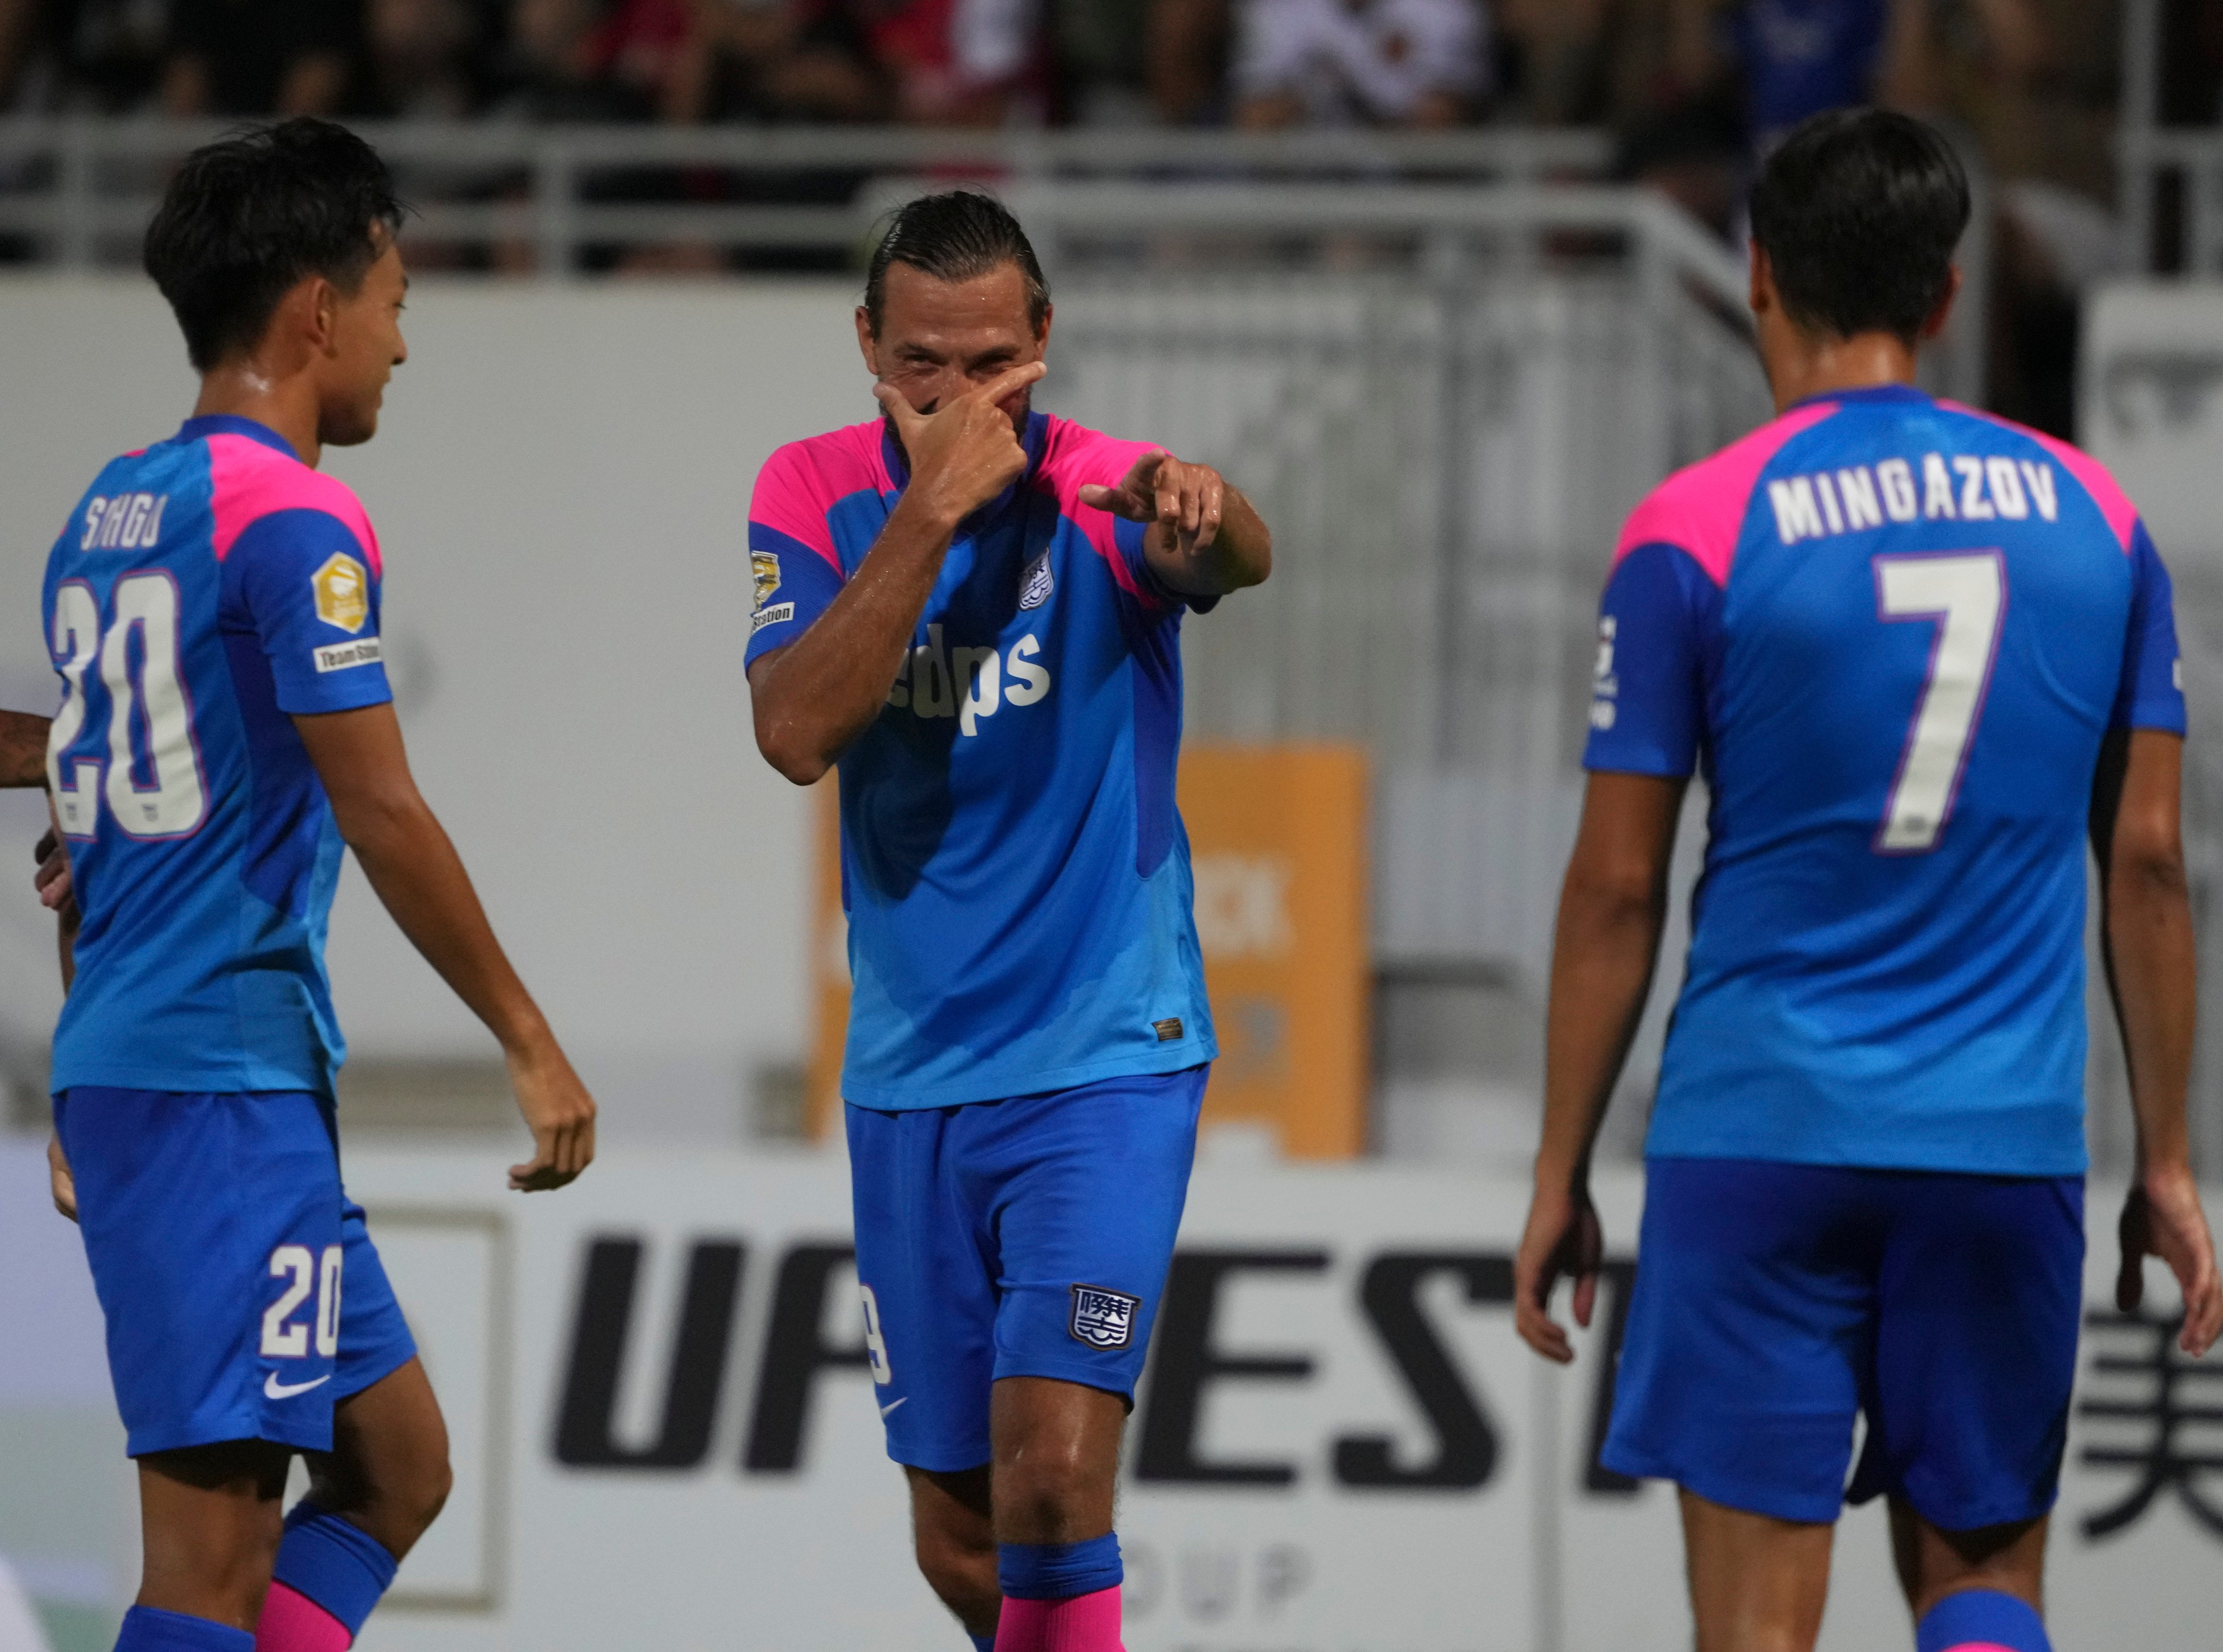 Kitchee’s Dejan Damjanovic celebrates after scoring a goal during the match against Eastern in the Sapling Cup at Mong Kok Stadium. Photo: Sam Tsang